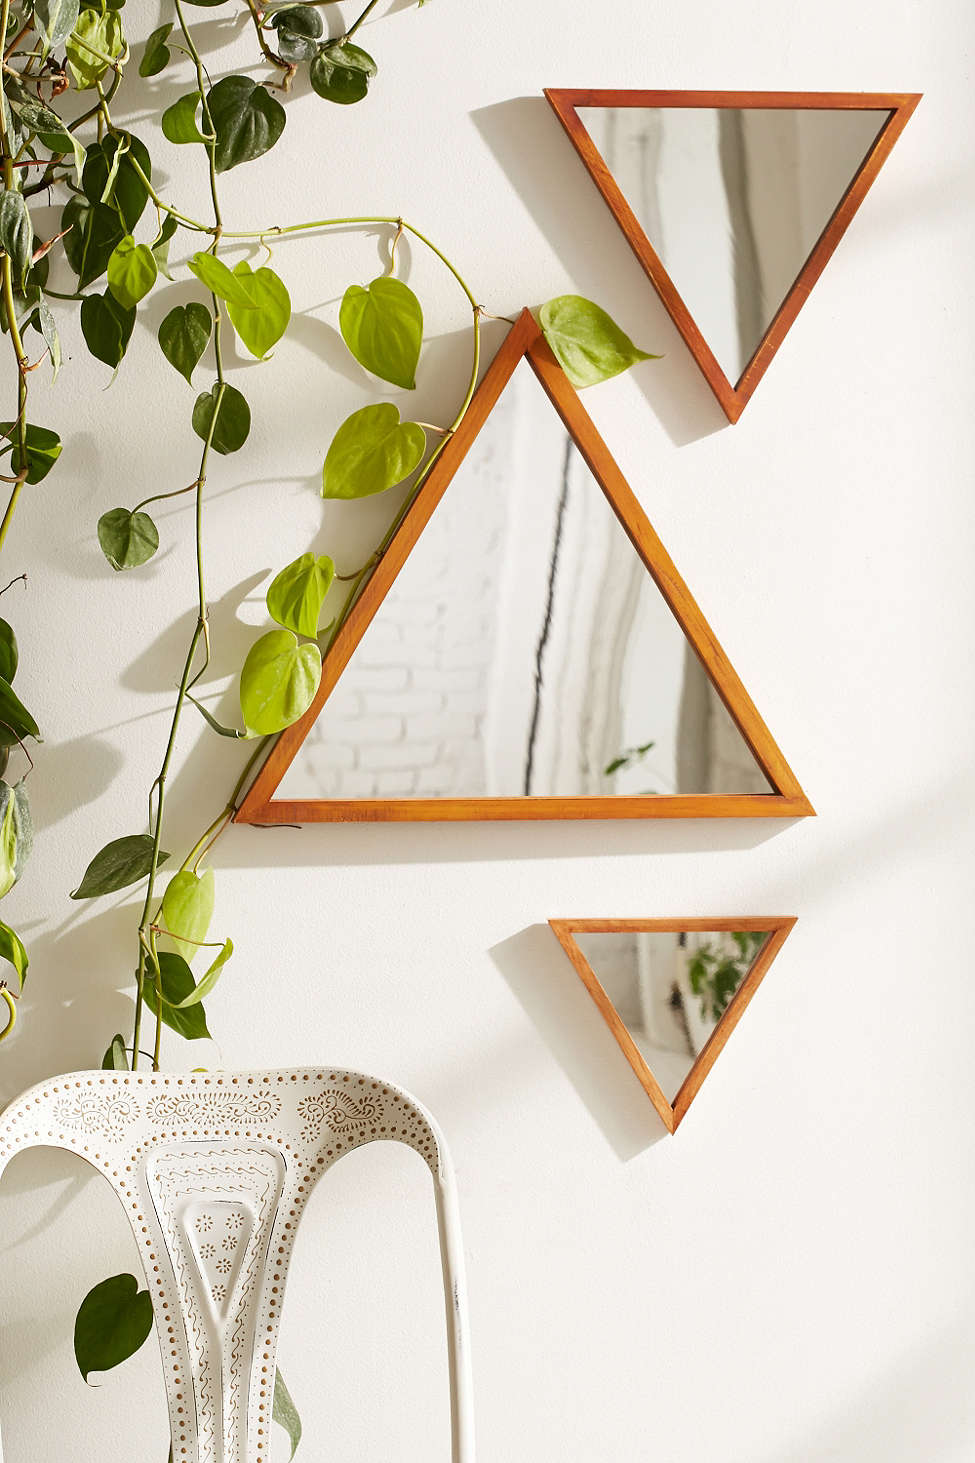 Pyramid mirrors from Urban Outfitters